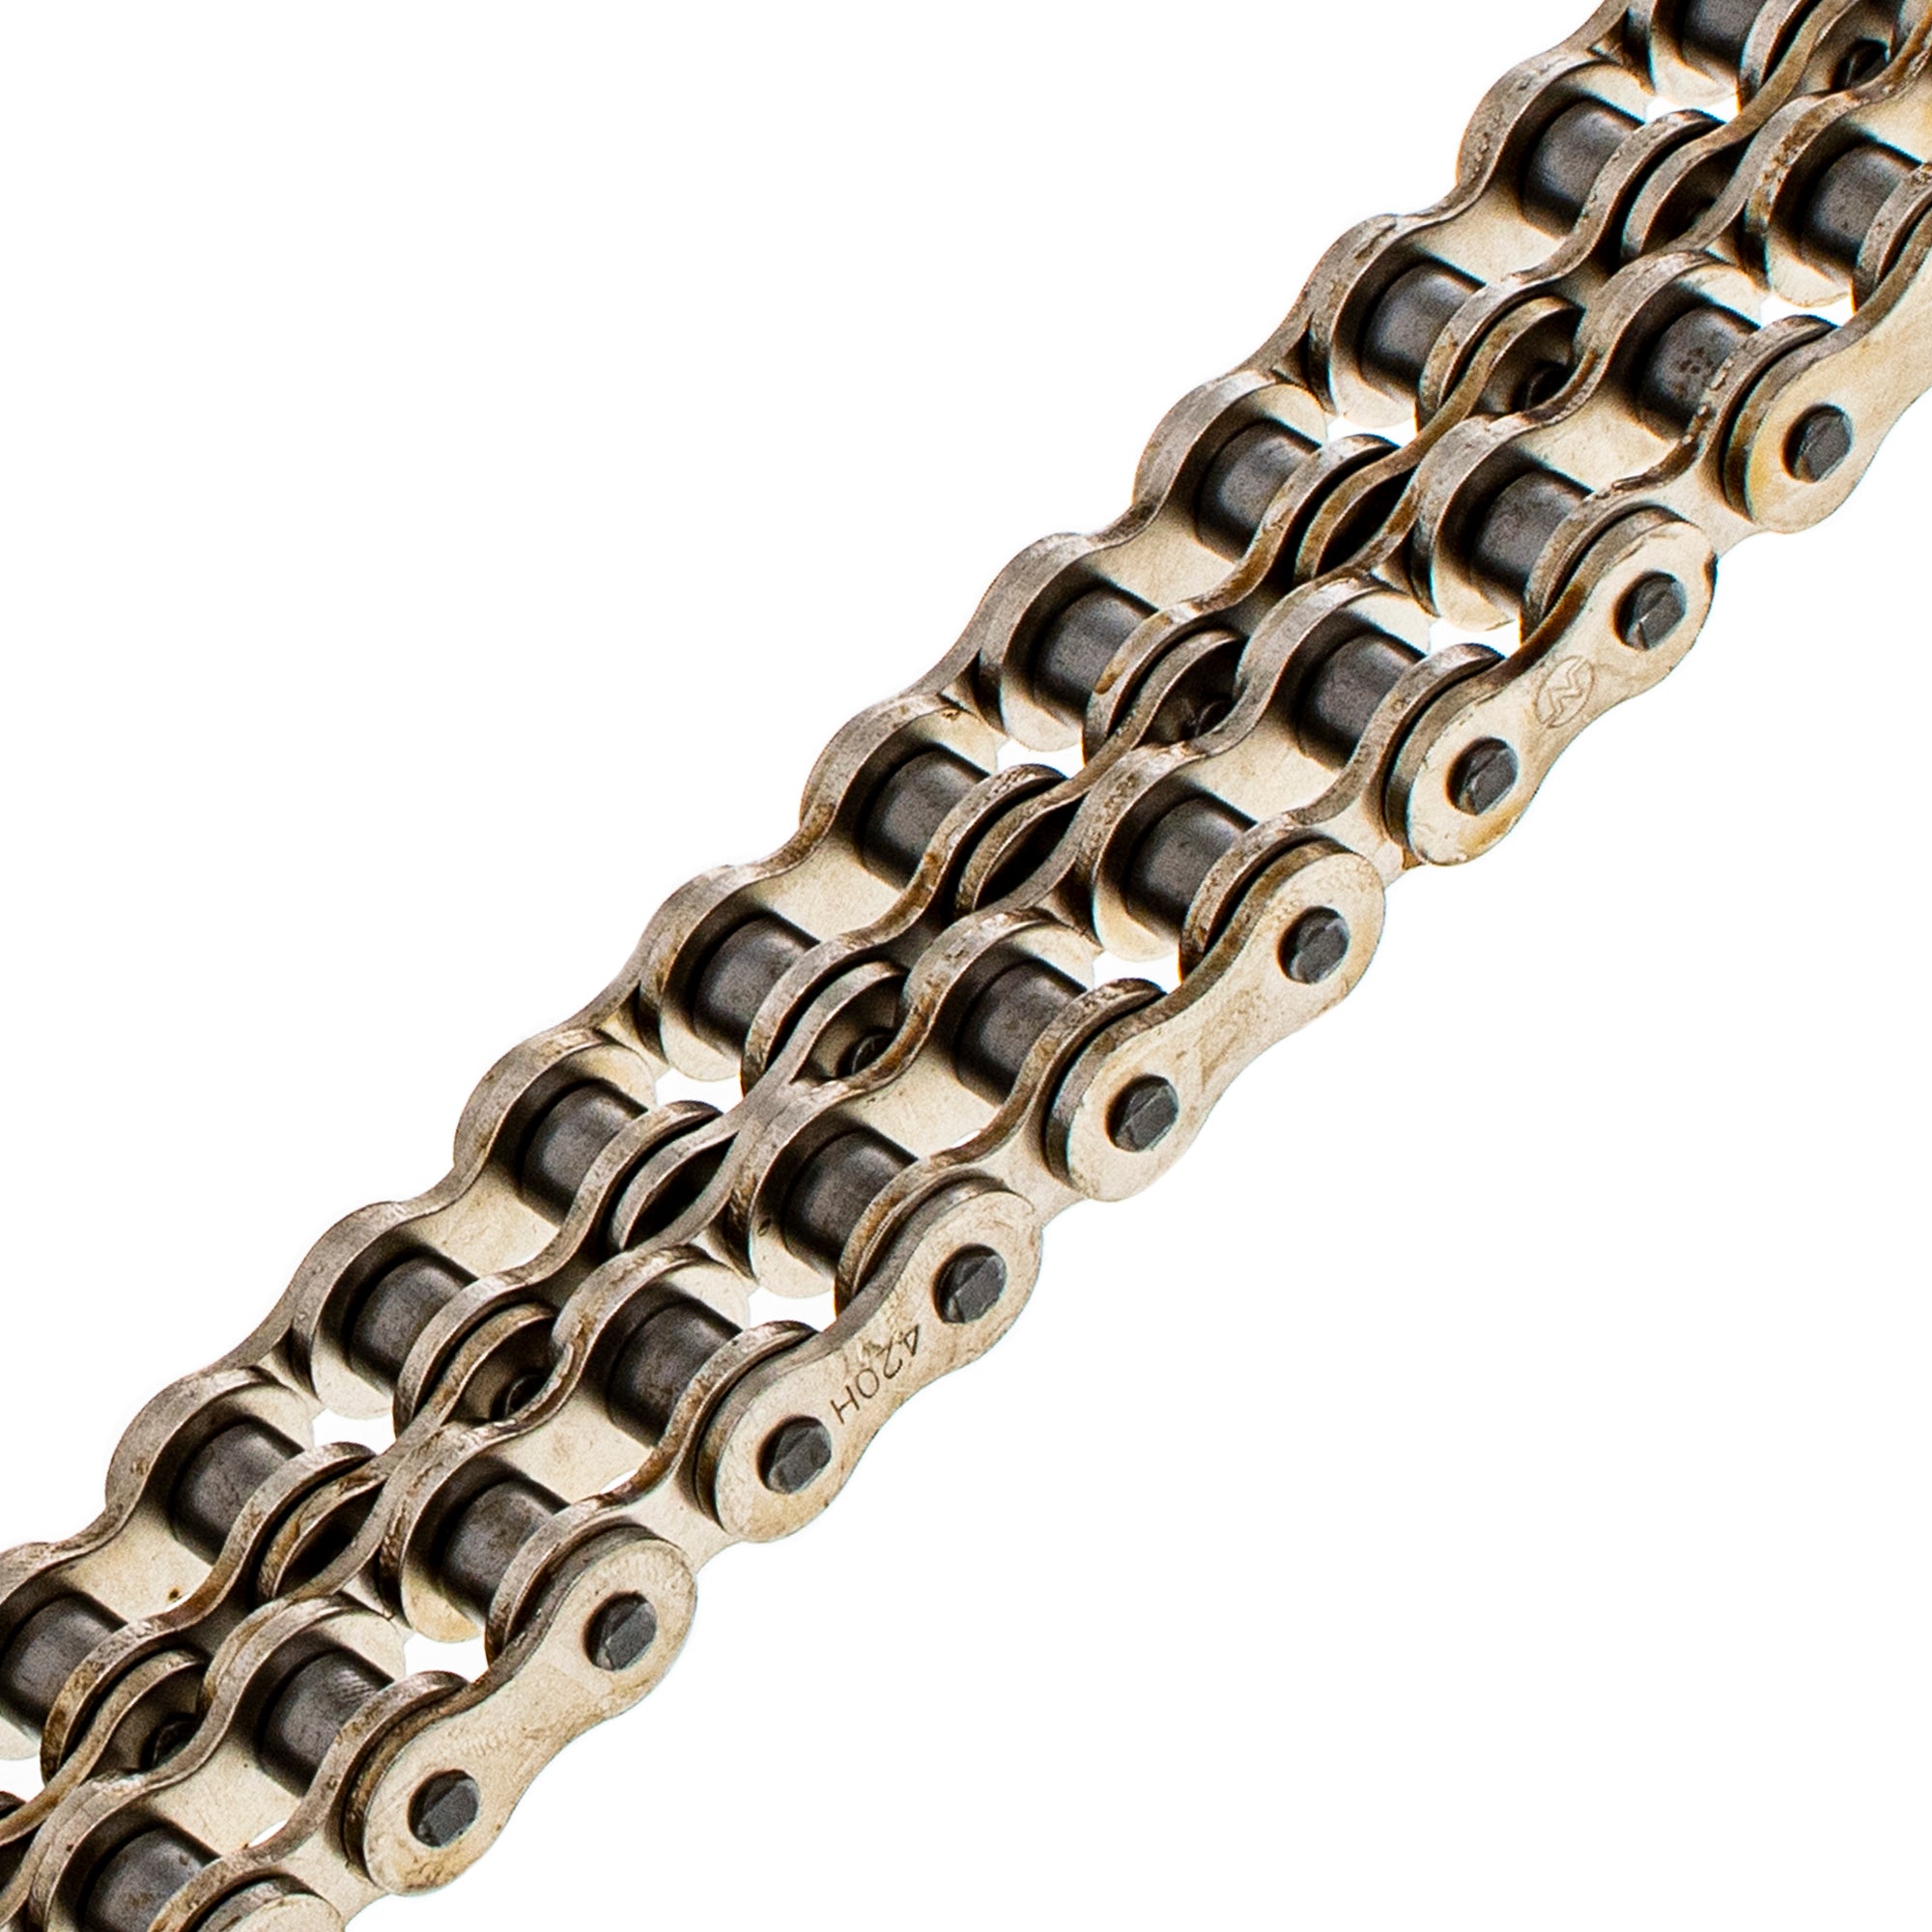 Drive Chain 96 Standard Non O-Ring w/ Master Link for zOTHER XL80S C70 5209 NICHE 519-CDC2210H